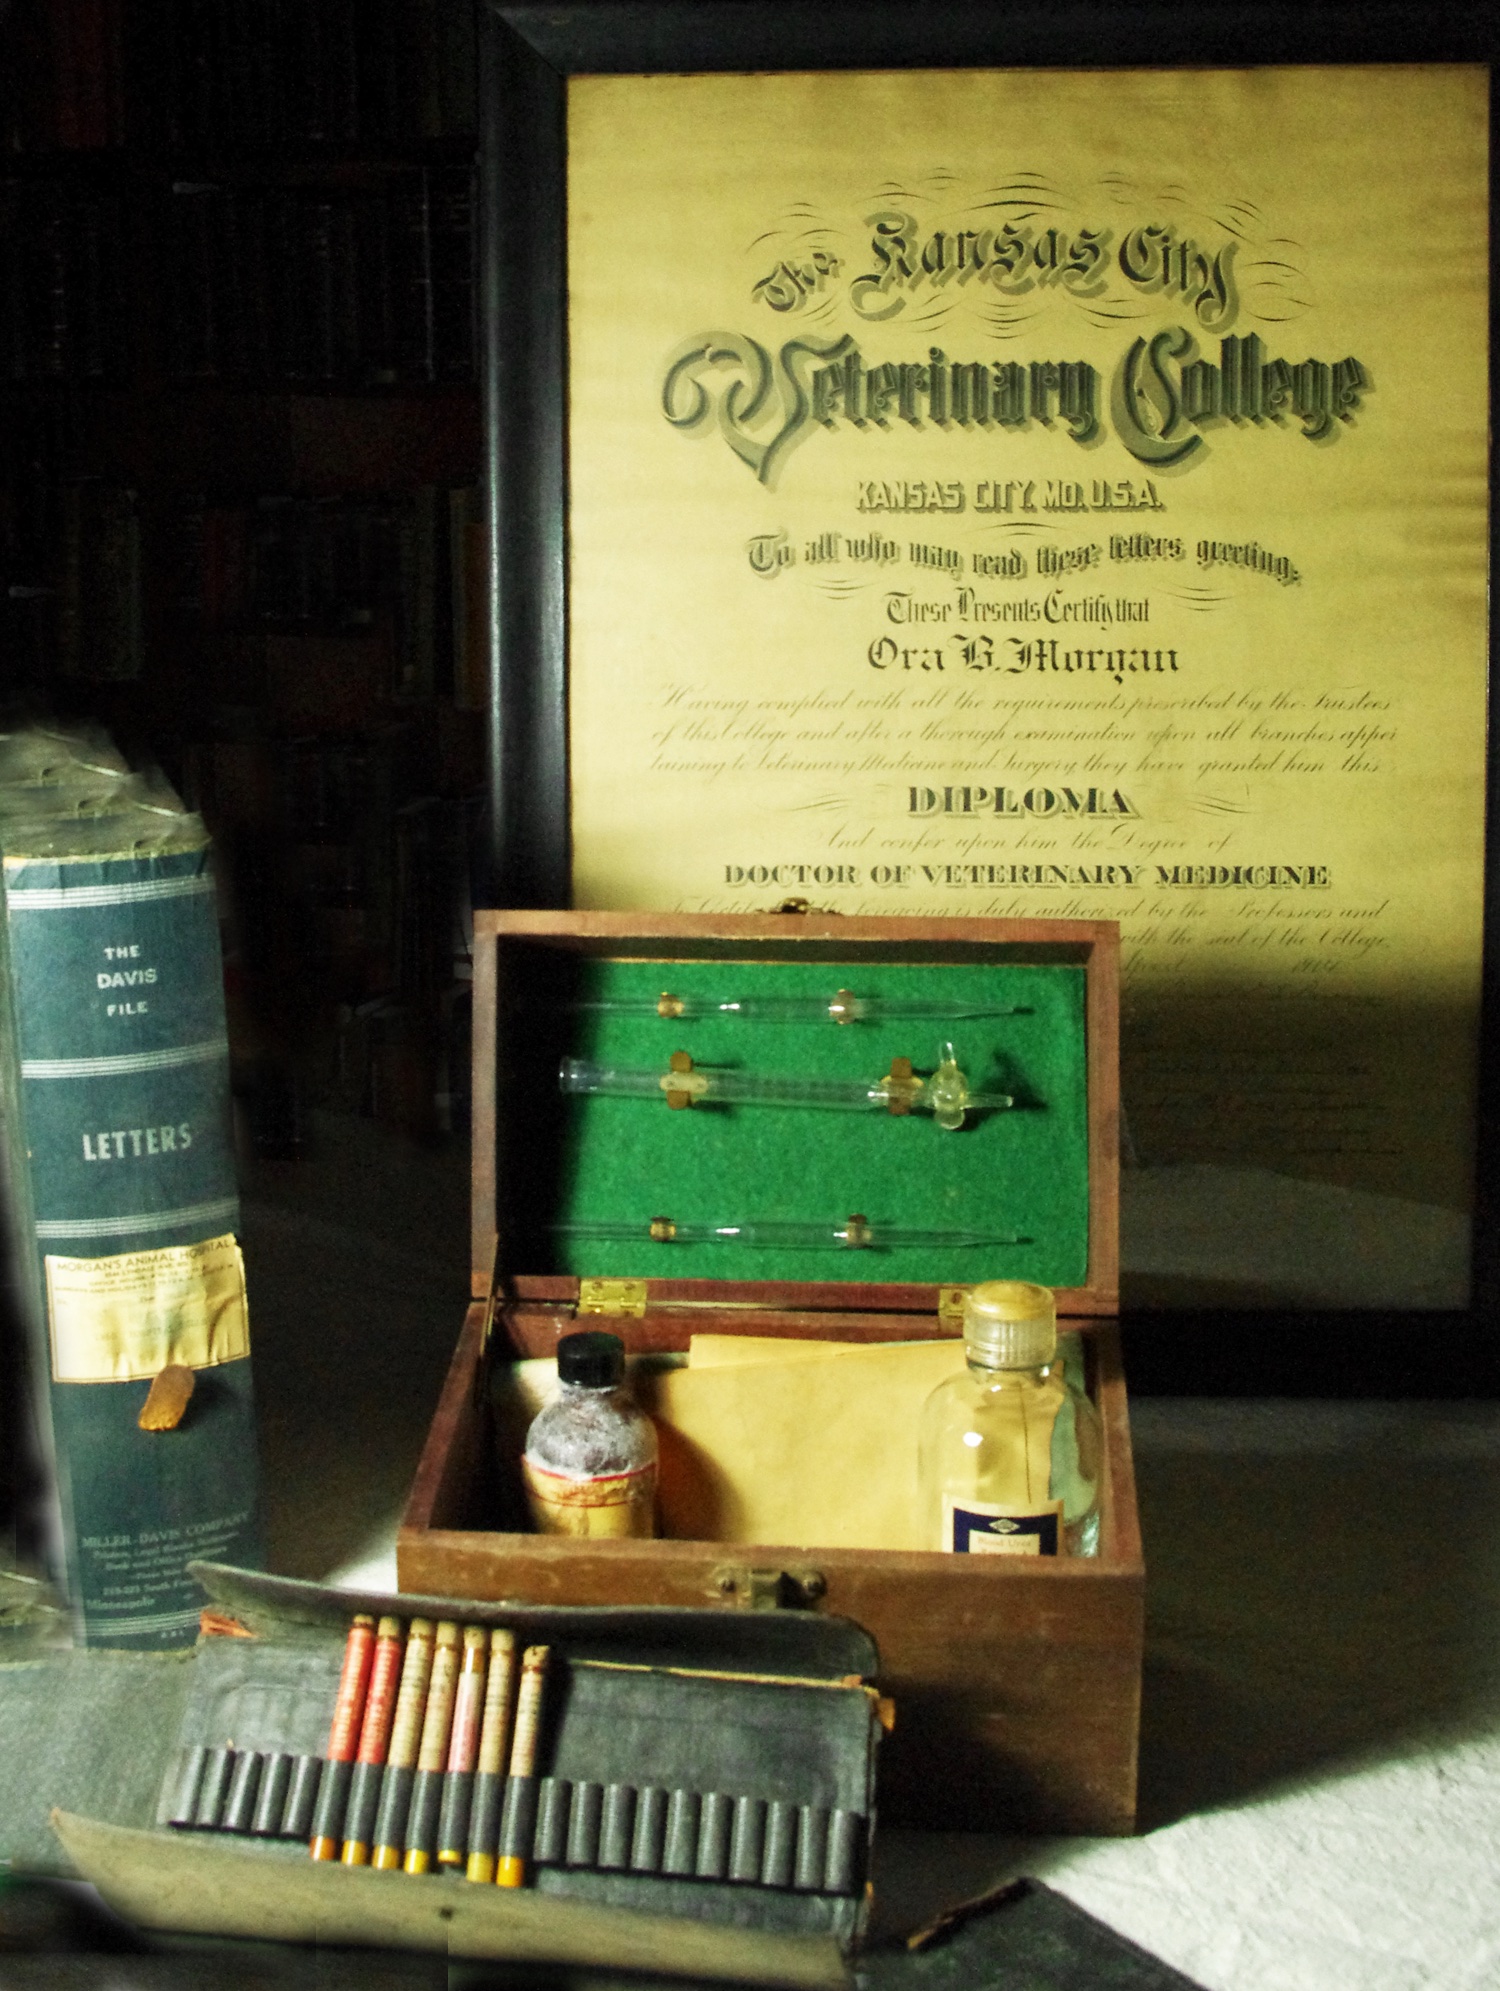 Artifacts recently collected from the Lyndale Animal Hospital including Morgan's 1914 diploma